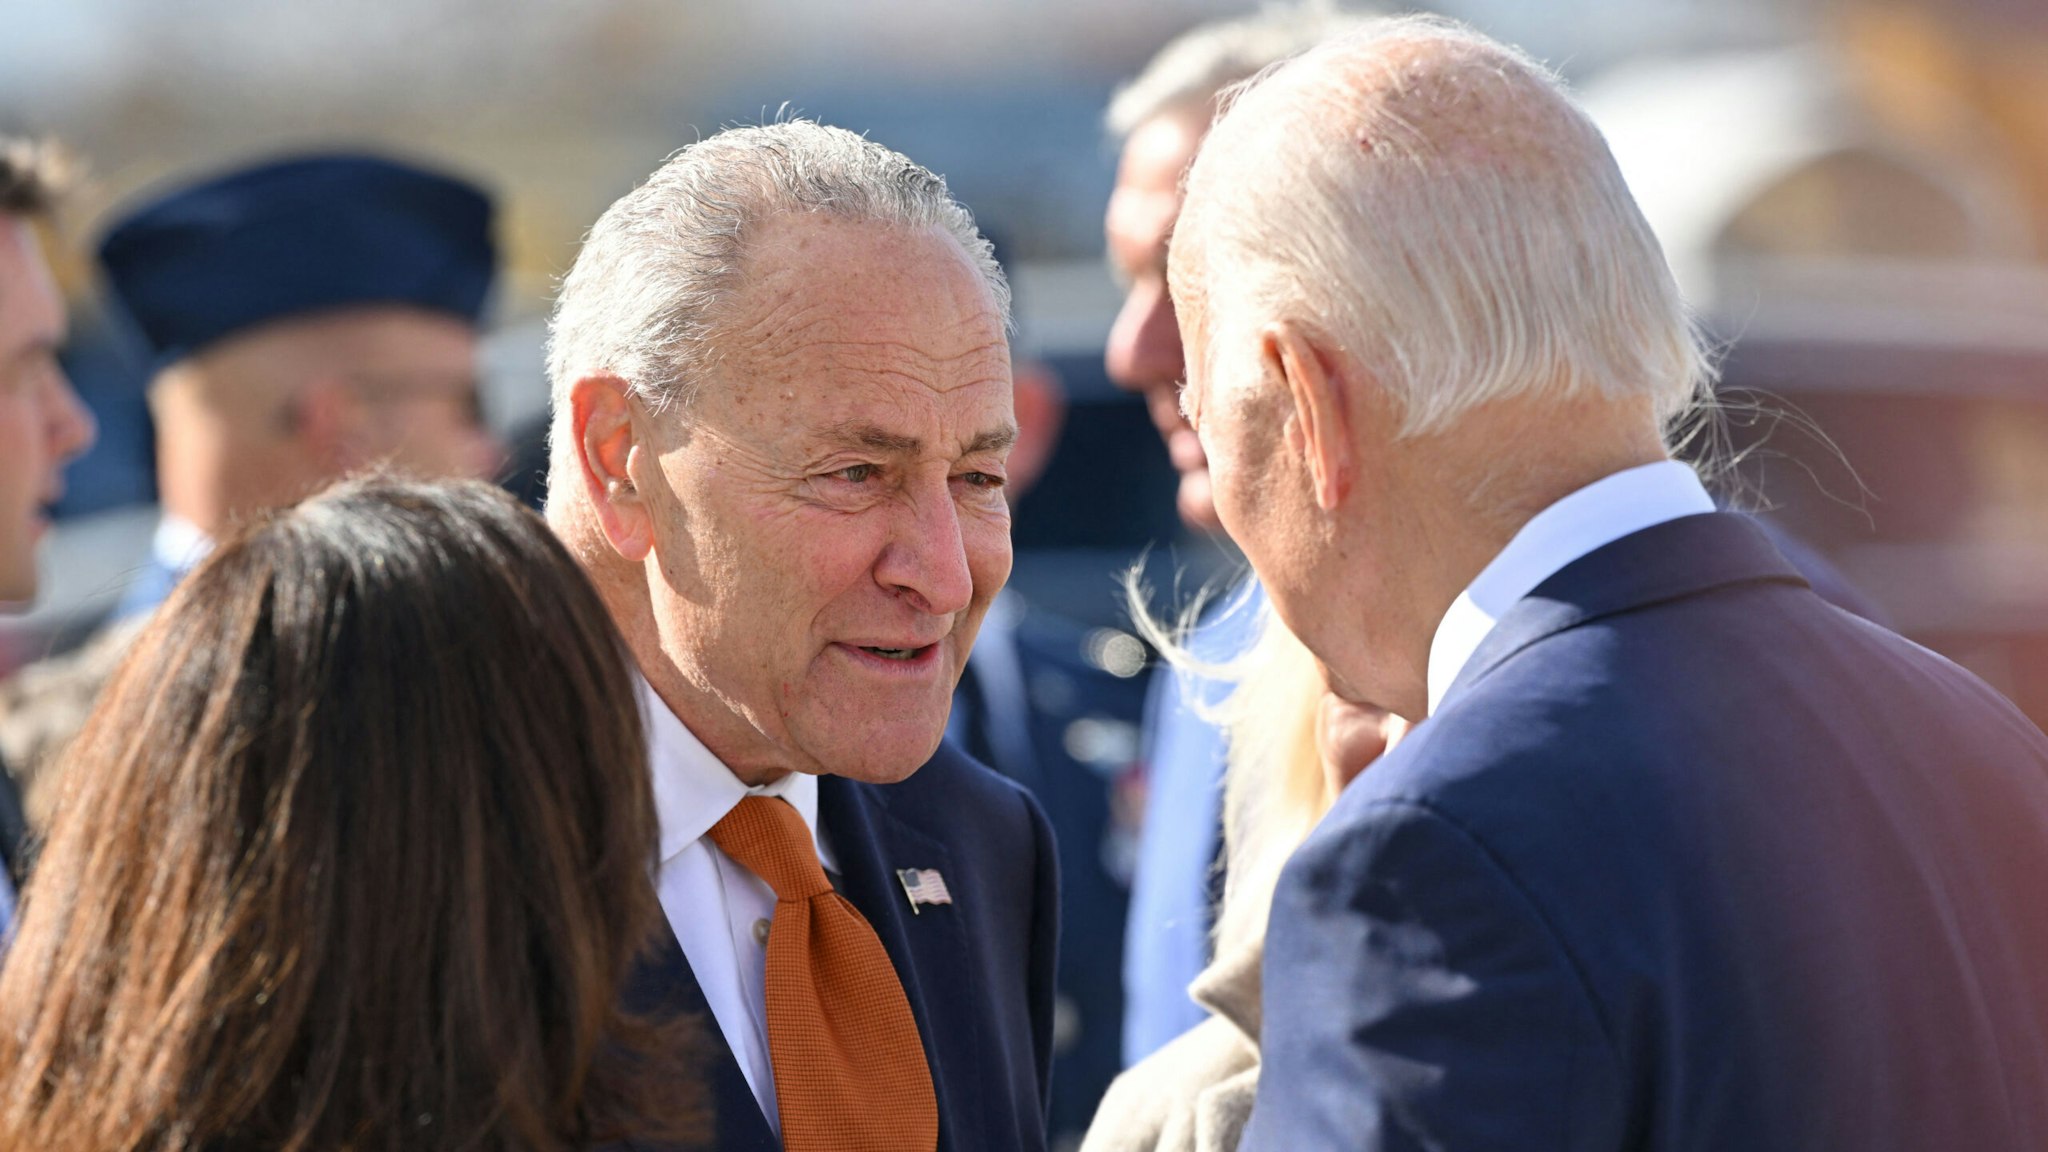 US President Joe Biden(R) is greeted by US Senate Majority Leader Chuck Schumer (C) and New York Governor Kathy Hochul (L) as Biden arrives at Hancock International Airport in Syracuse, New York, on October 27, 2022.